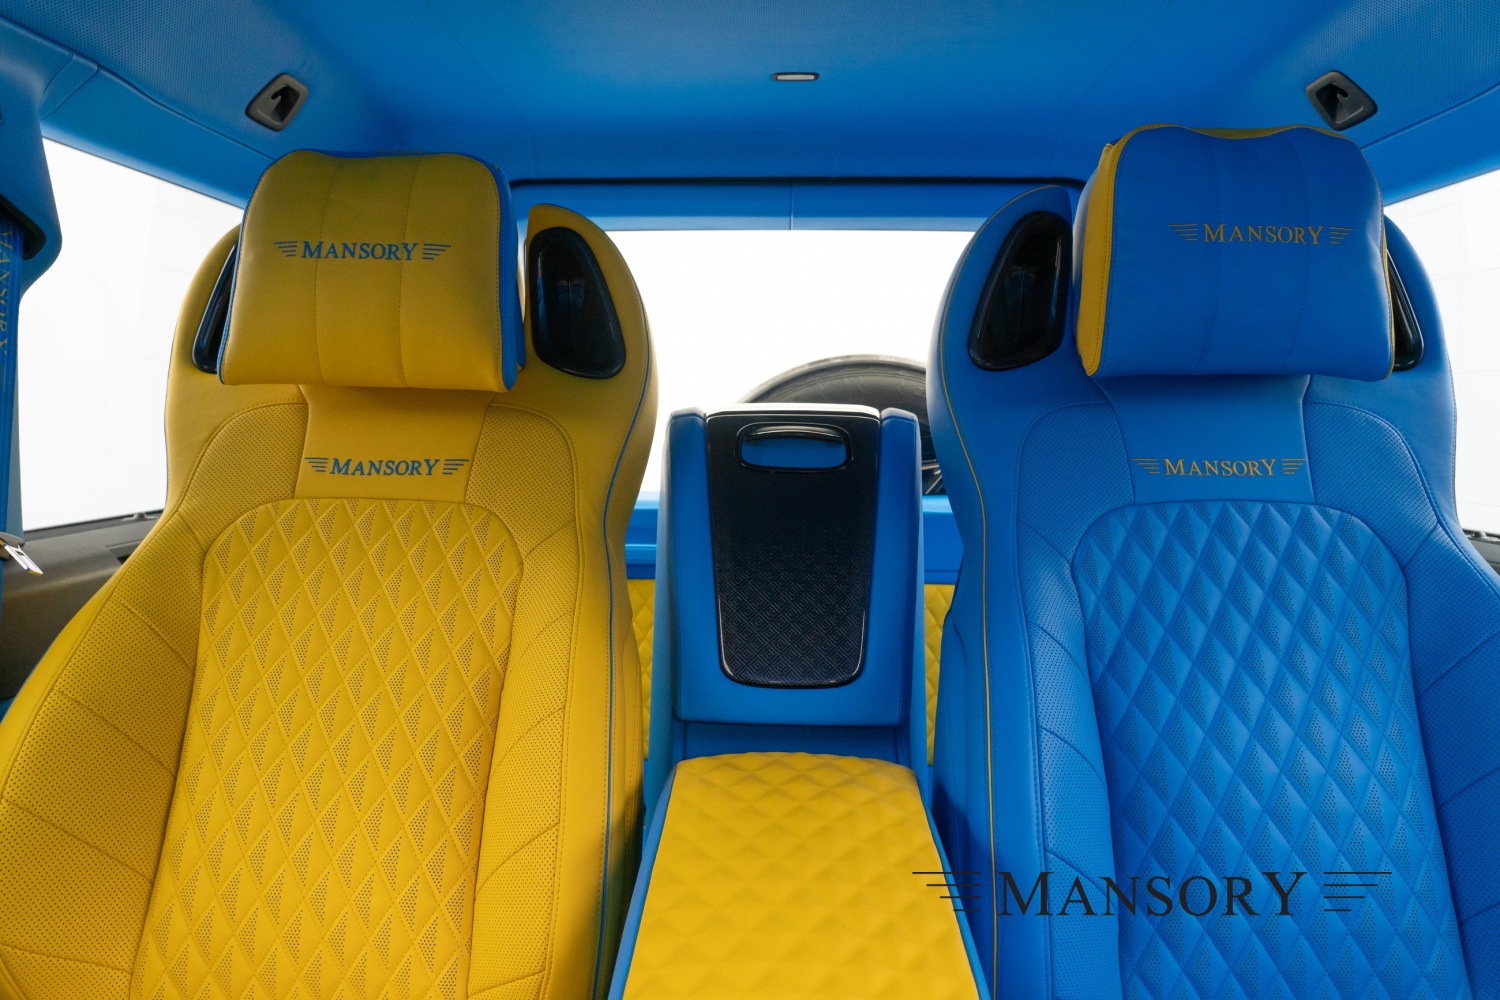 Mansory P900 based on the Mercedes G-Class | Mansory